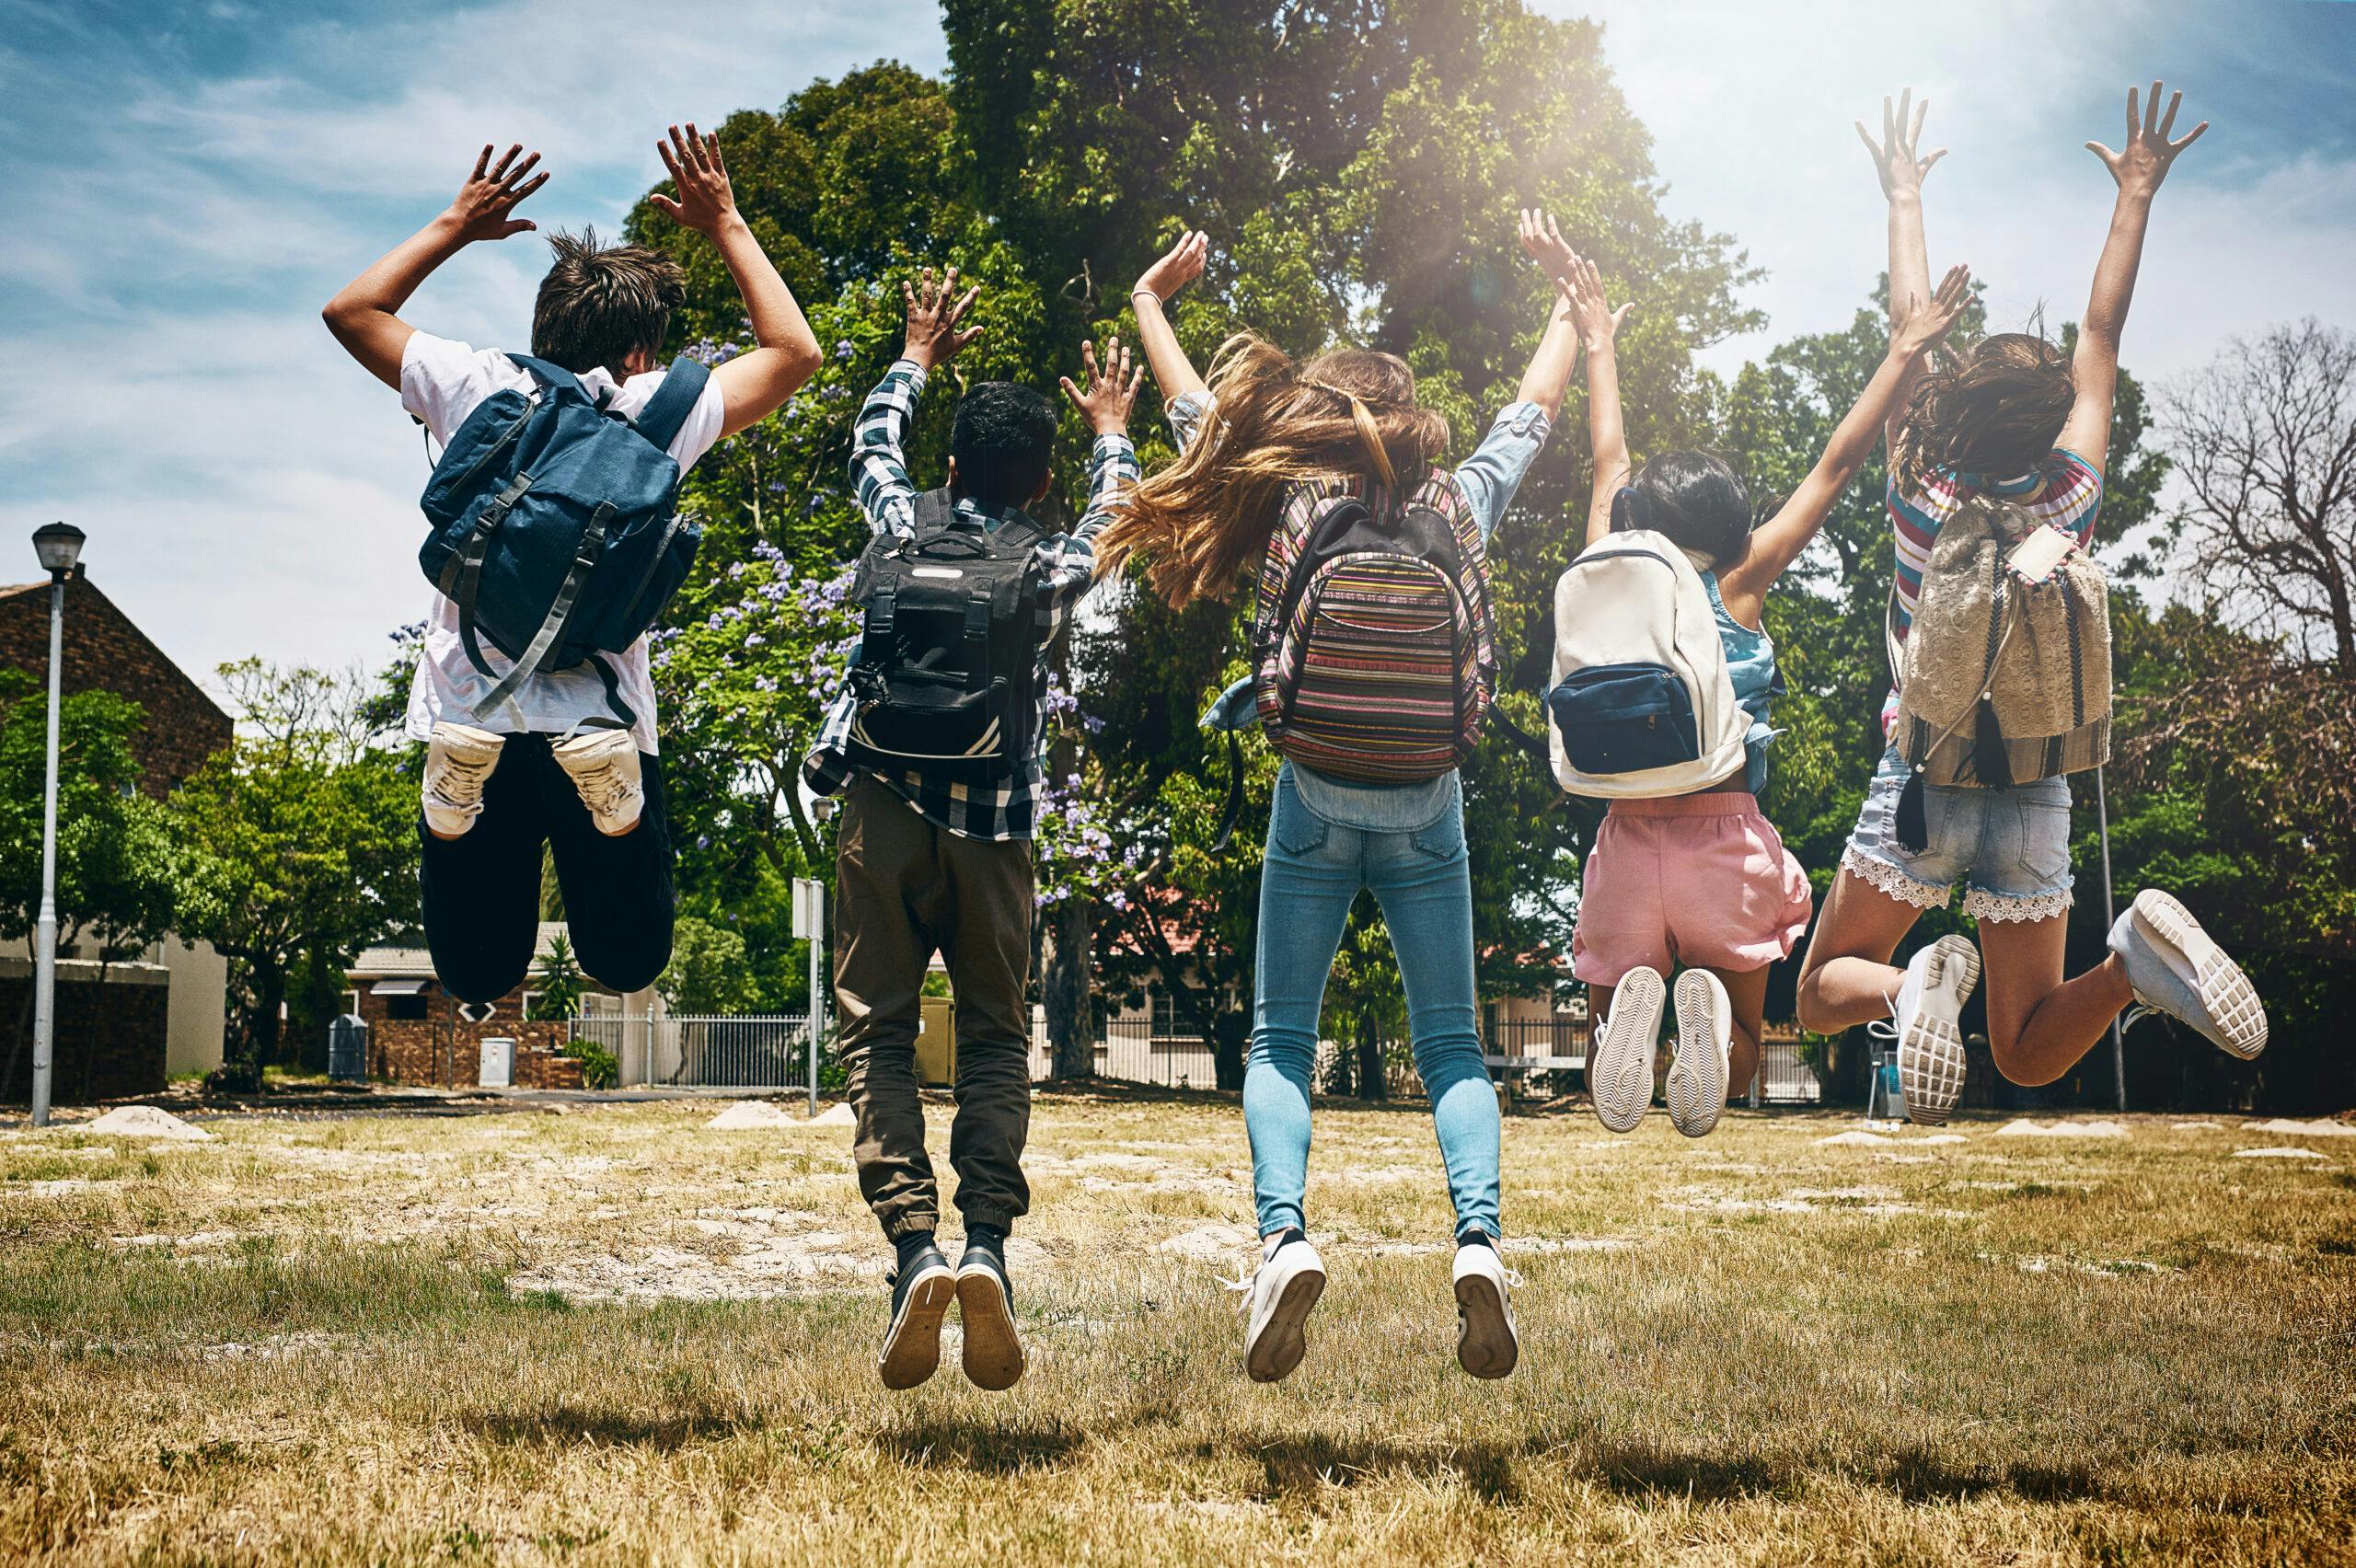 Five teens with school bags on, jumping in joy because it is now school holidays.